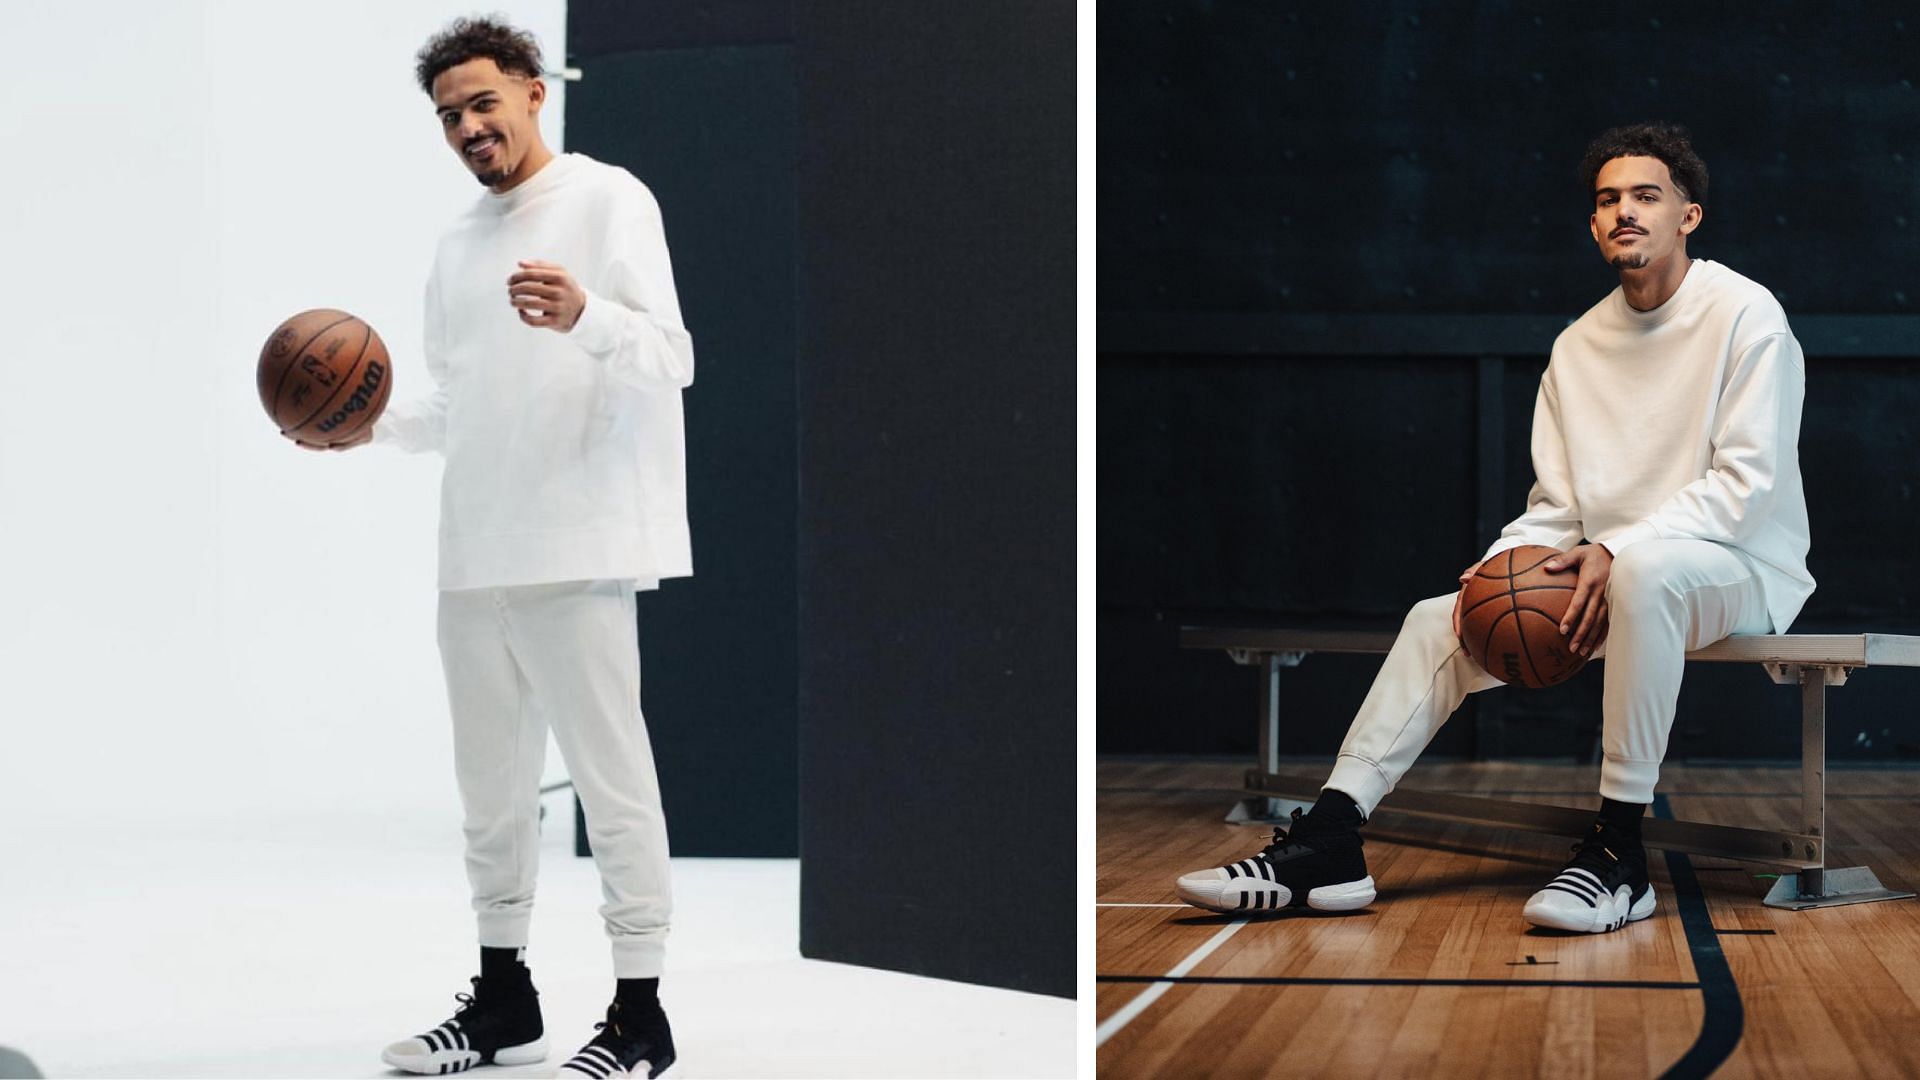 Adidas Trae Young 2 Black/White shoes (Image via Instagram/@traeyoung)